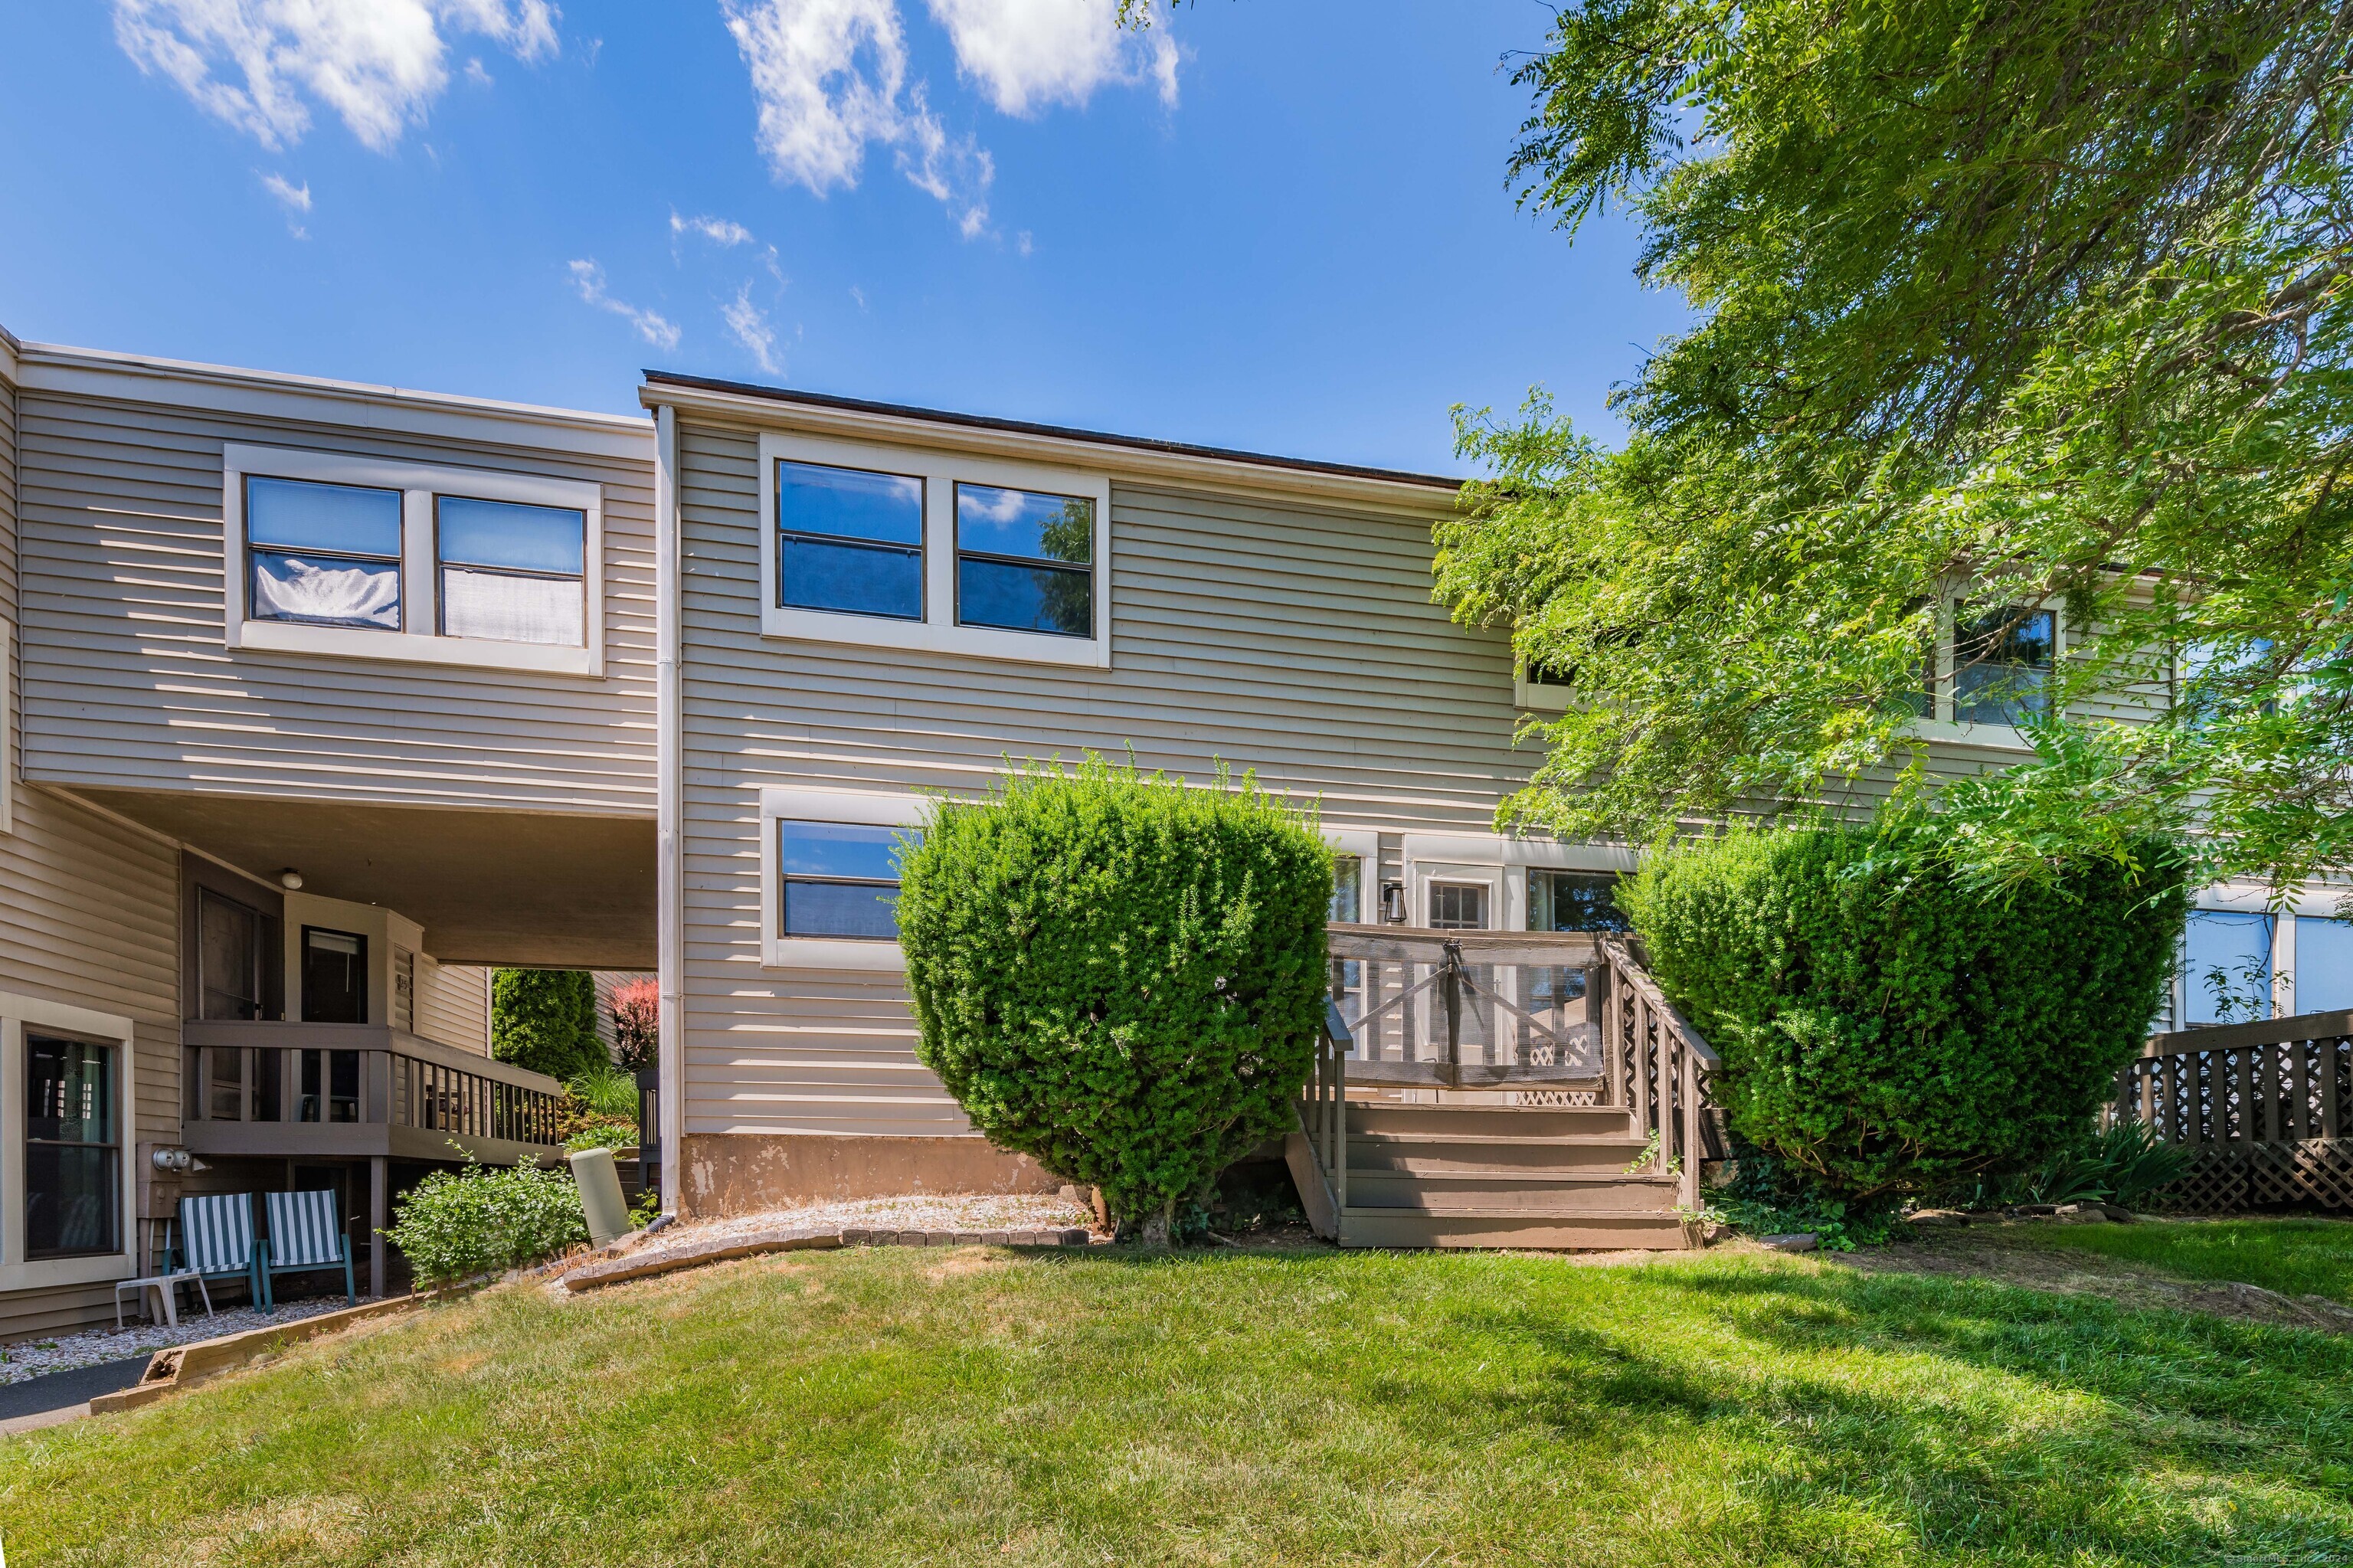 23 Clemens Court Rocky Hill CT